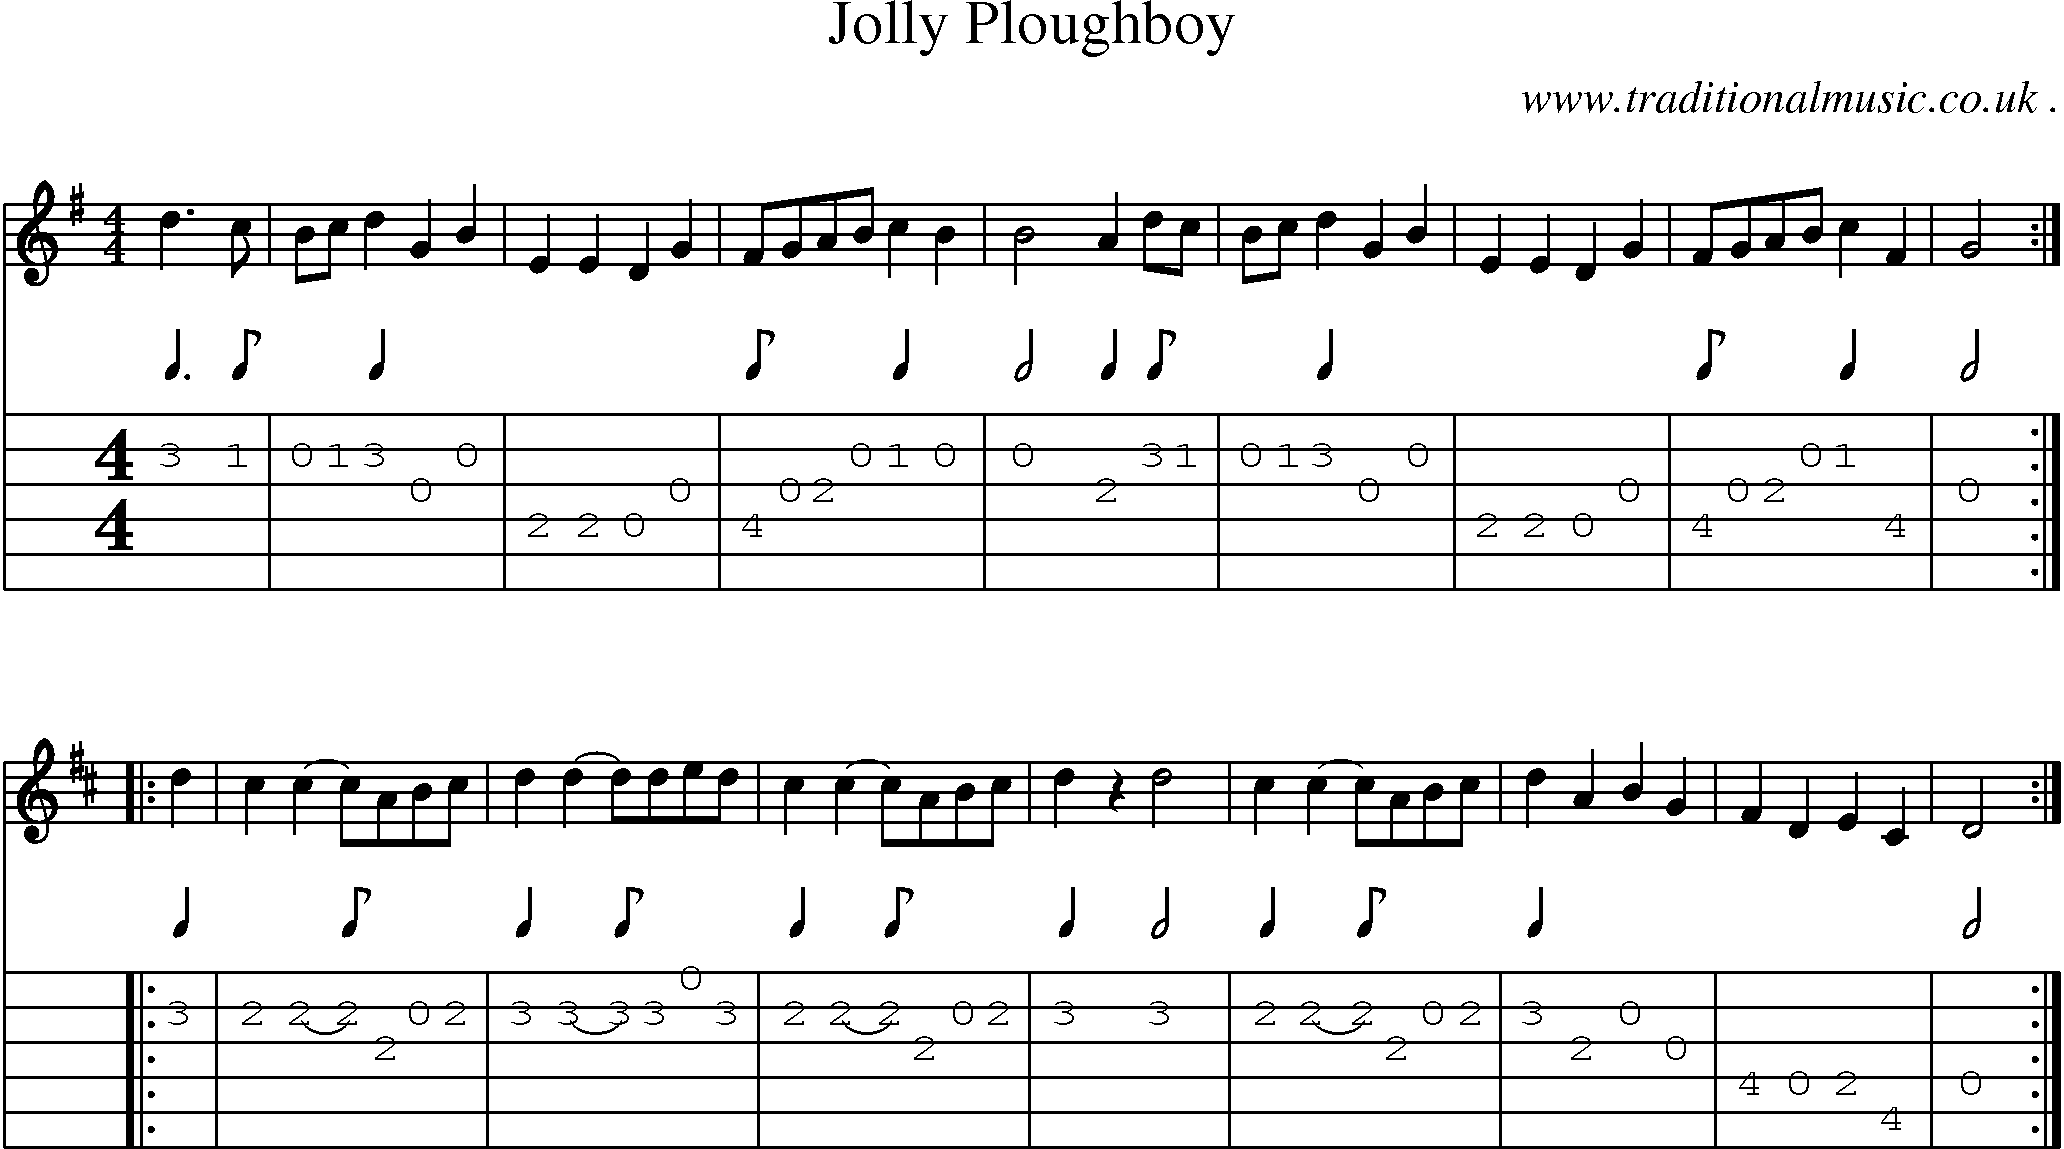 Sheet-music  score, Chords and Guitar Tabs for Jolly Ploughboy